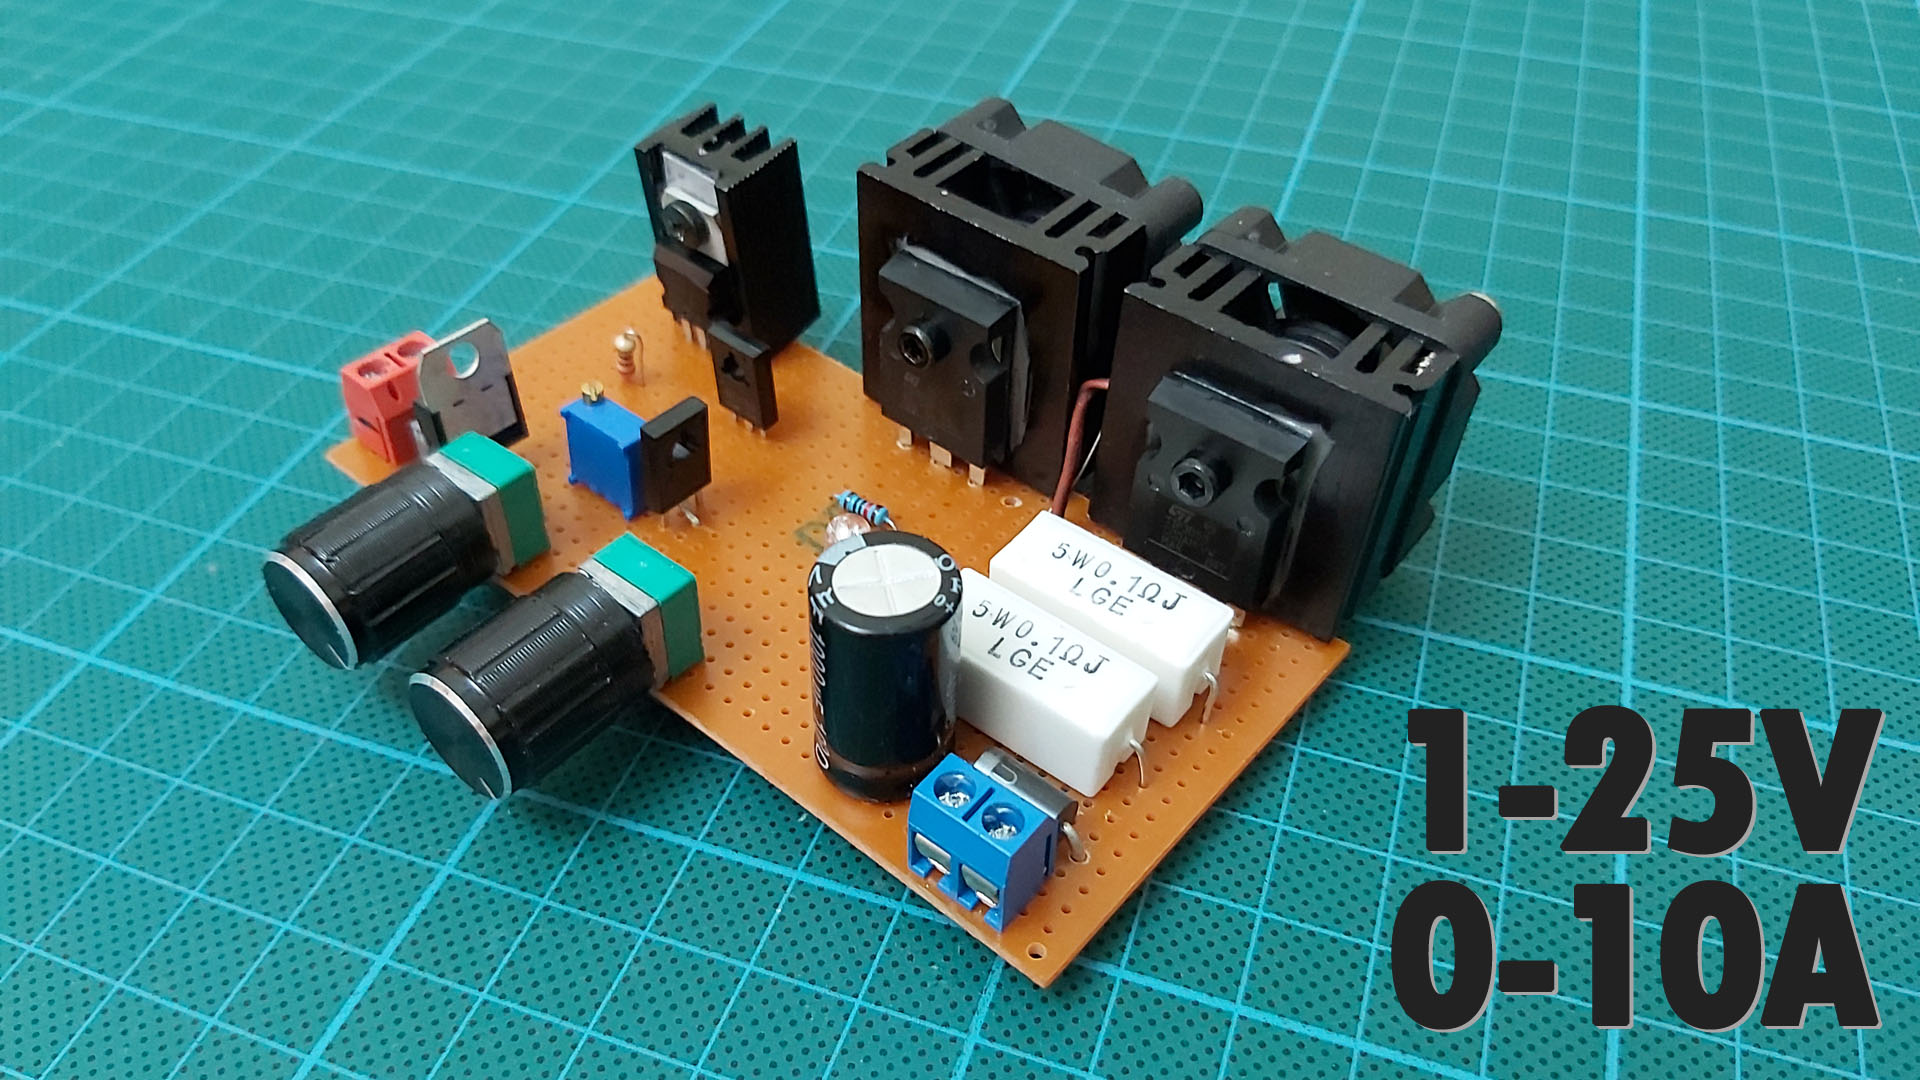 How To Make a Variable Power Supply. 1-25V & 0-10A Voltage & Current Adjustable Power Supply